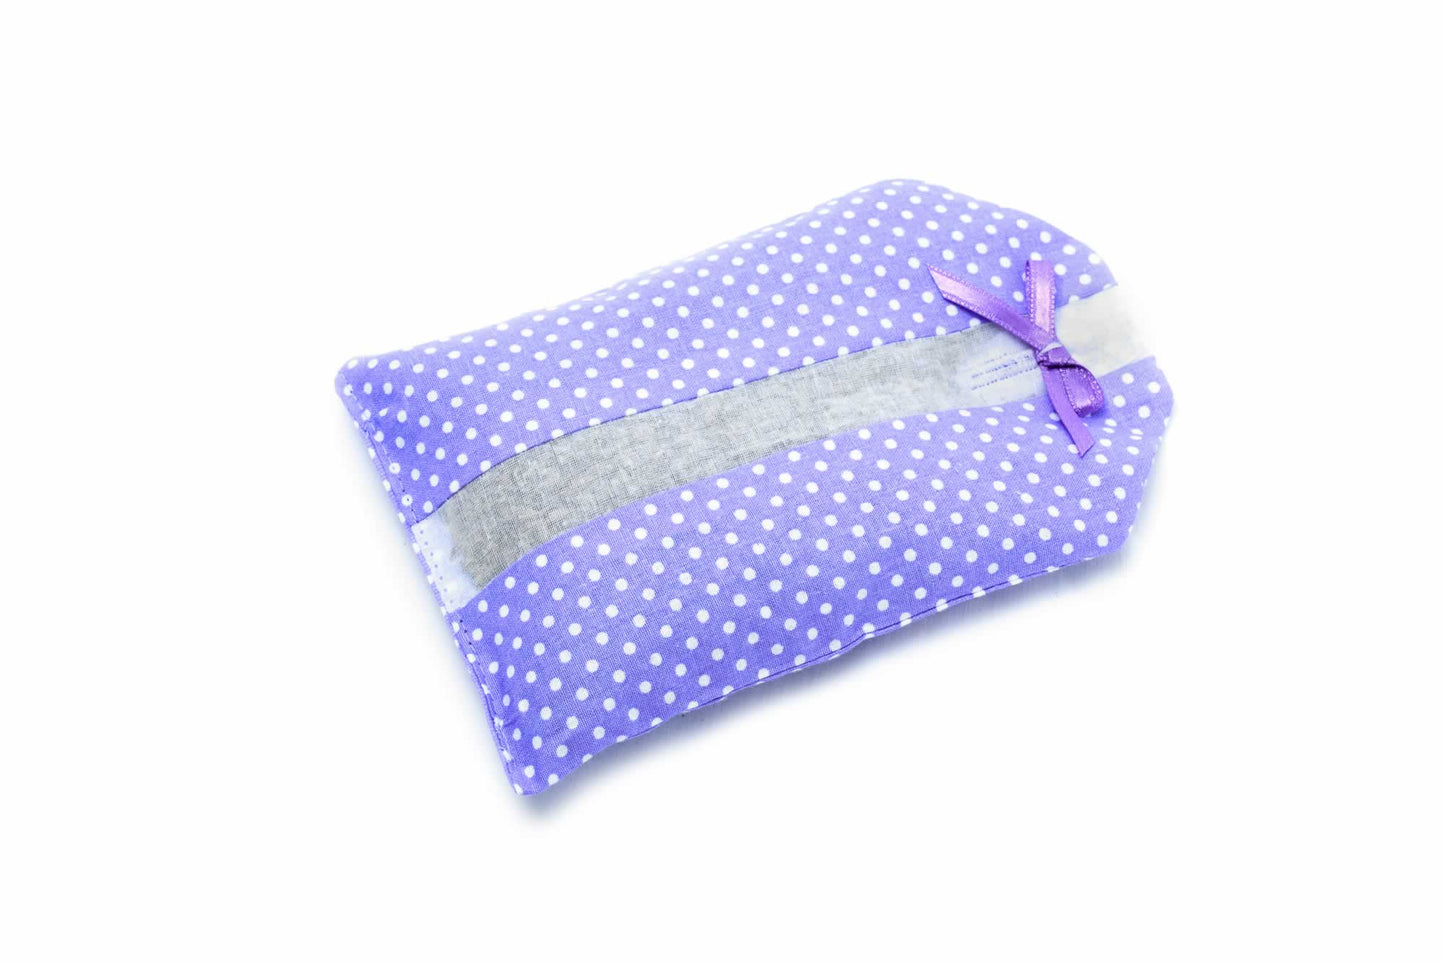 Luxurious scented bag of lavender for hangers